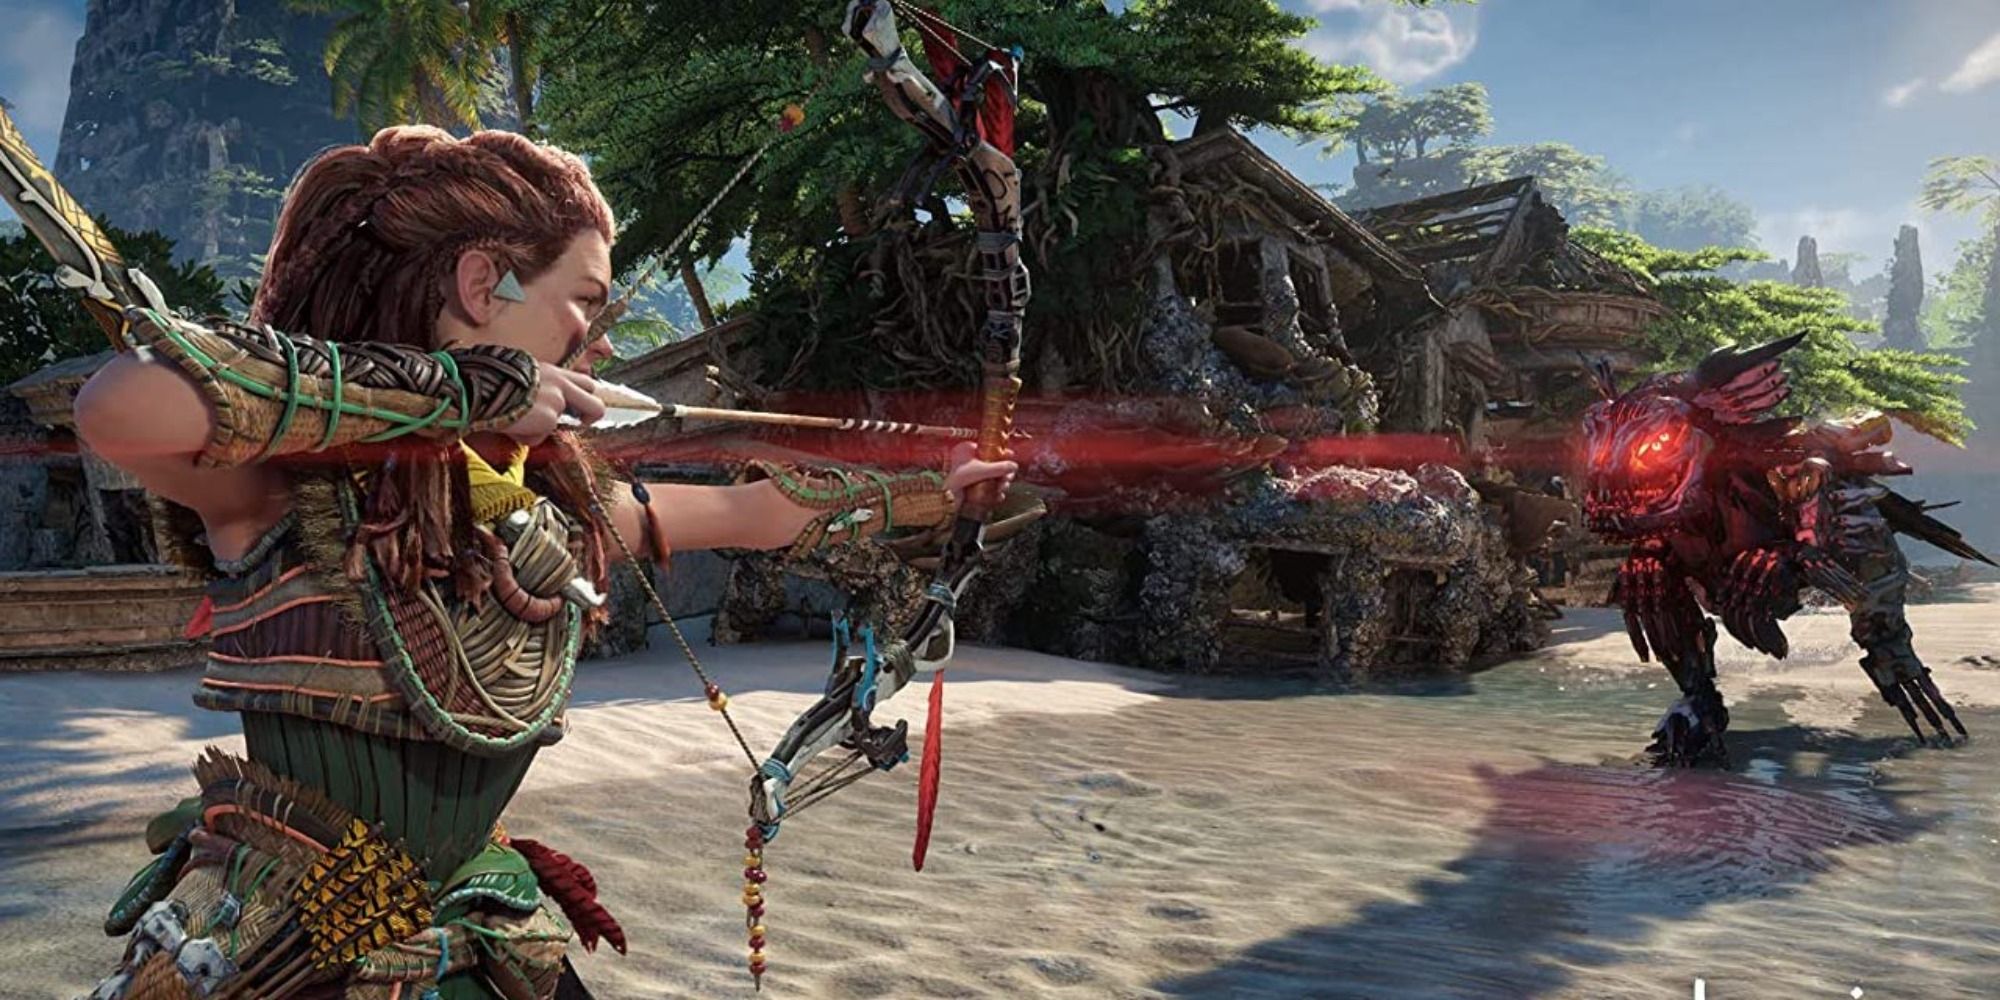 Aloy aiming her bow at a robo dino coming at her